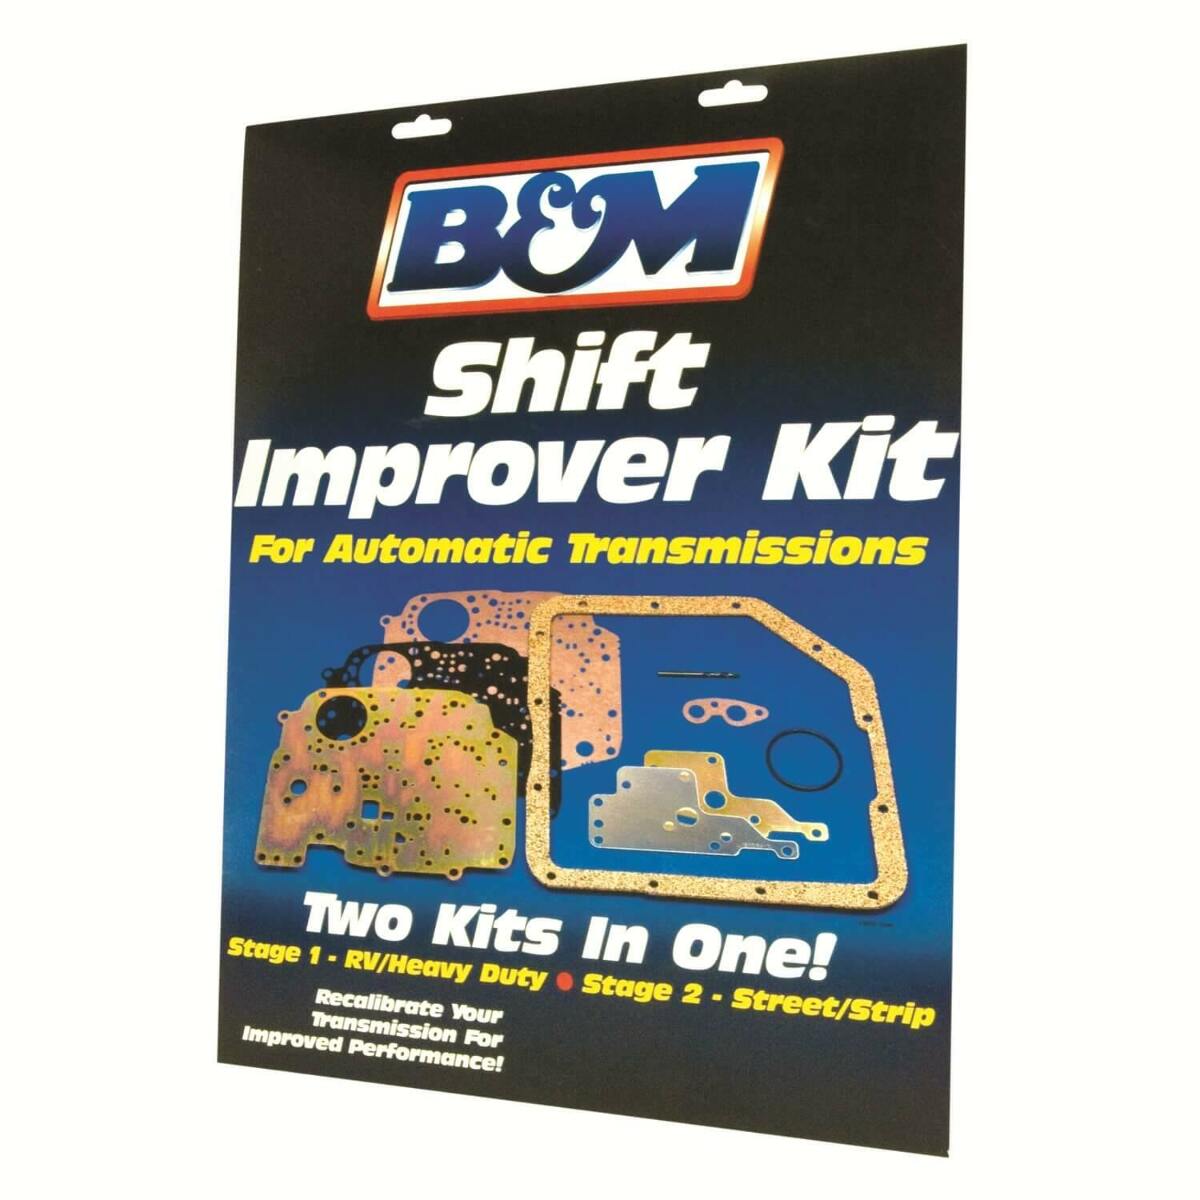 Shift Improver Kit for AODE and 4R70W Automatic Transmissions - 40264